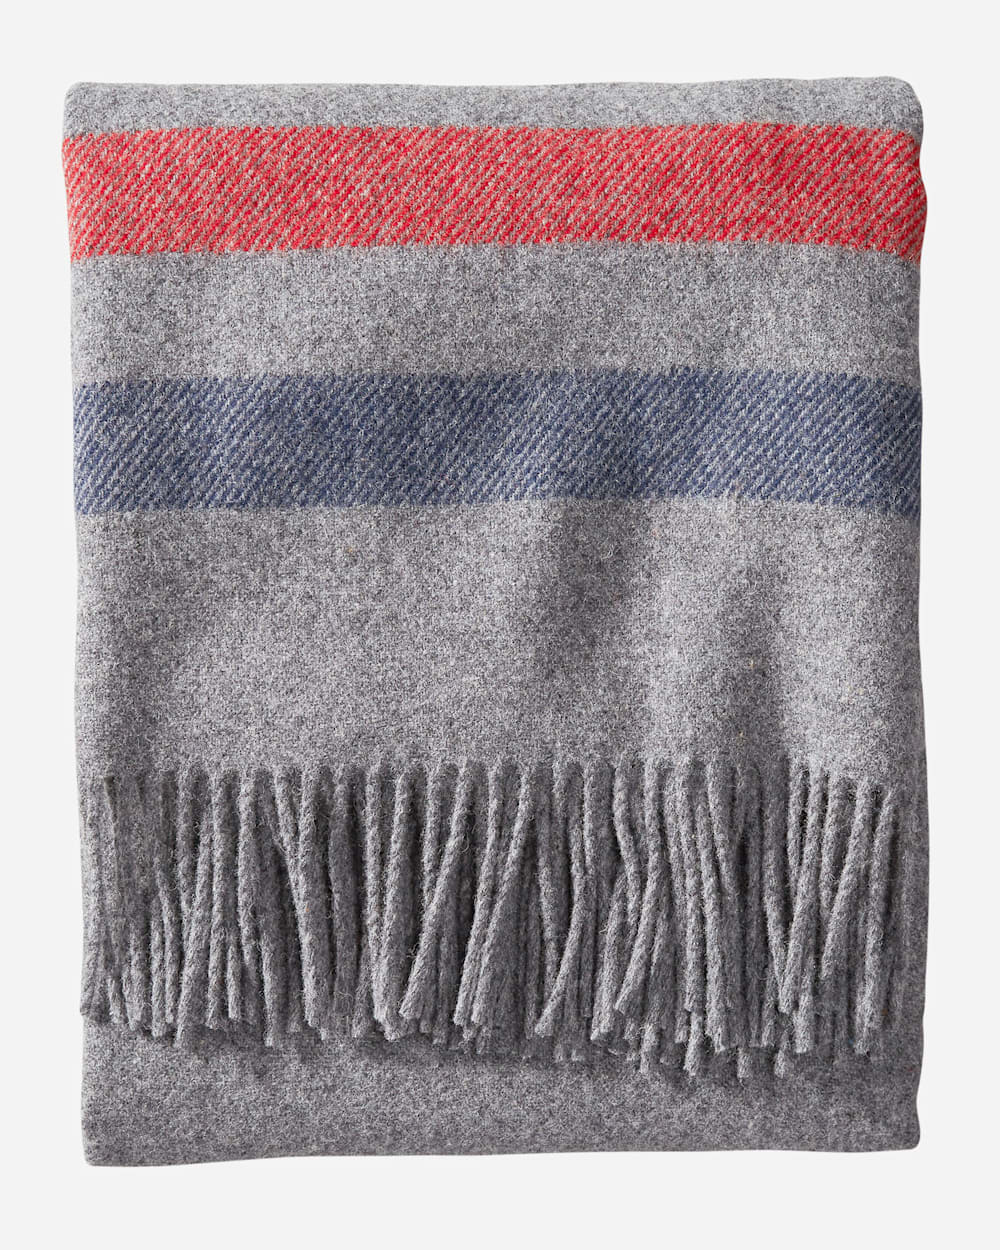 ALTERNATE VIEW OF ECO-WISE WOOL FRINGED THROW IN GREY STRIPE image number 2